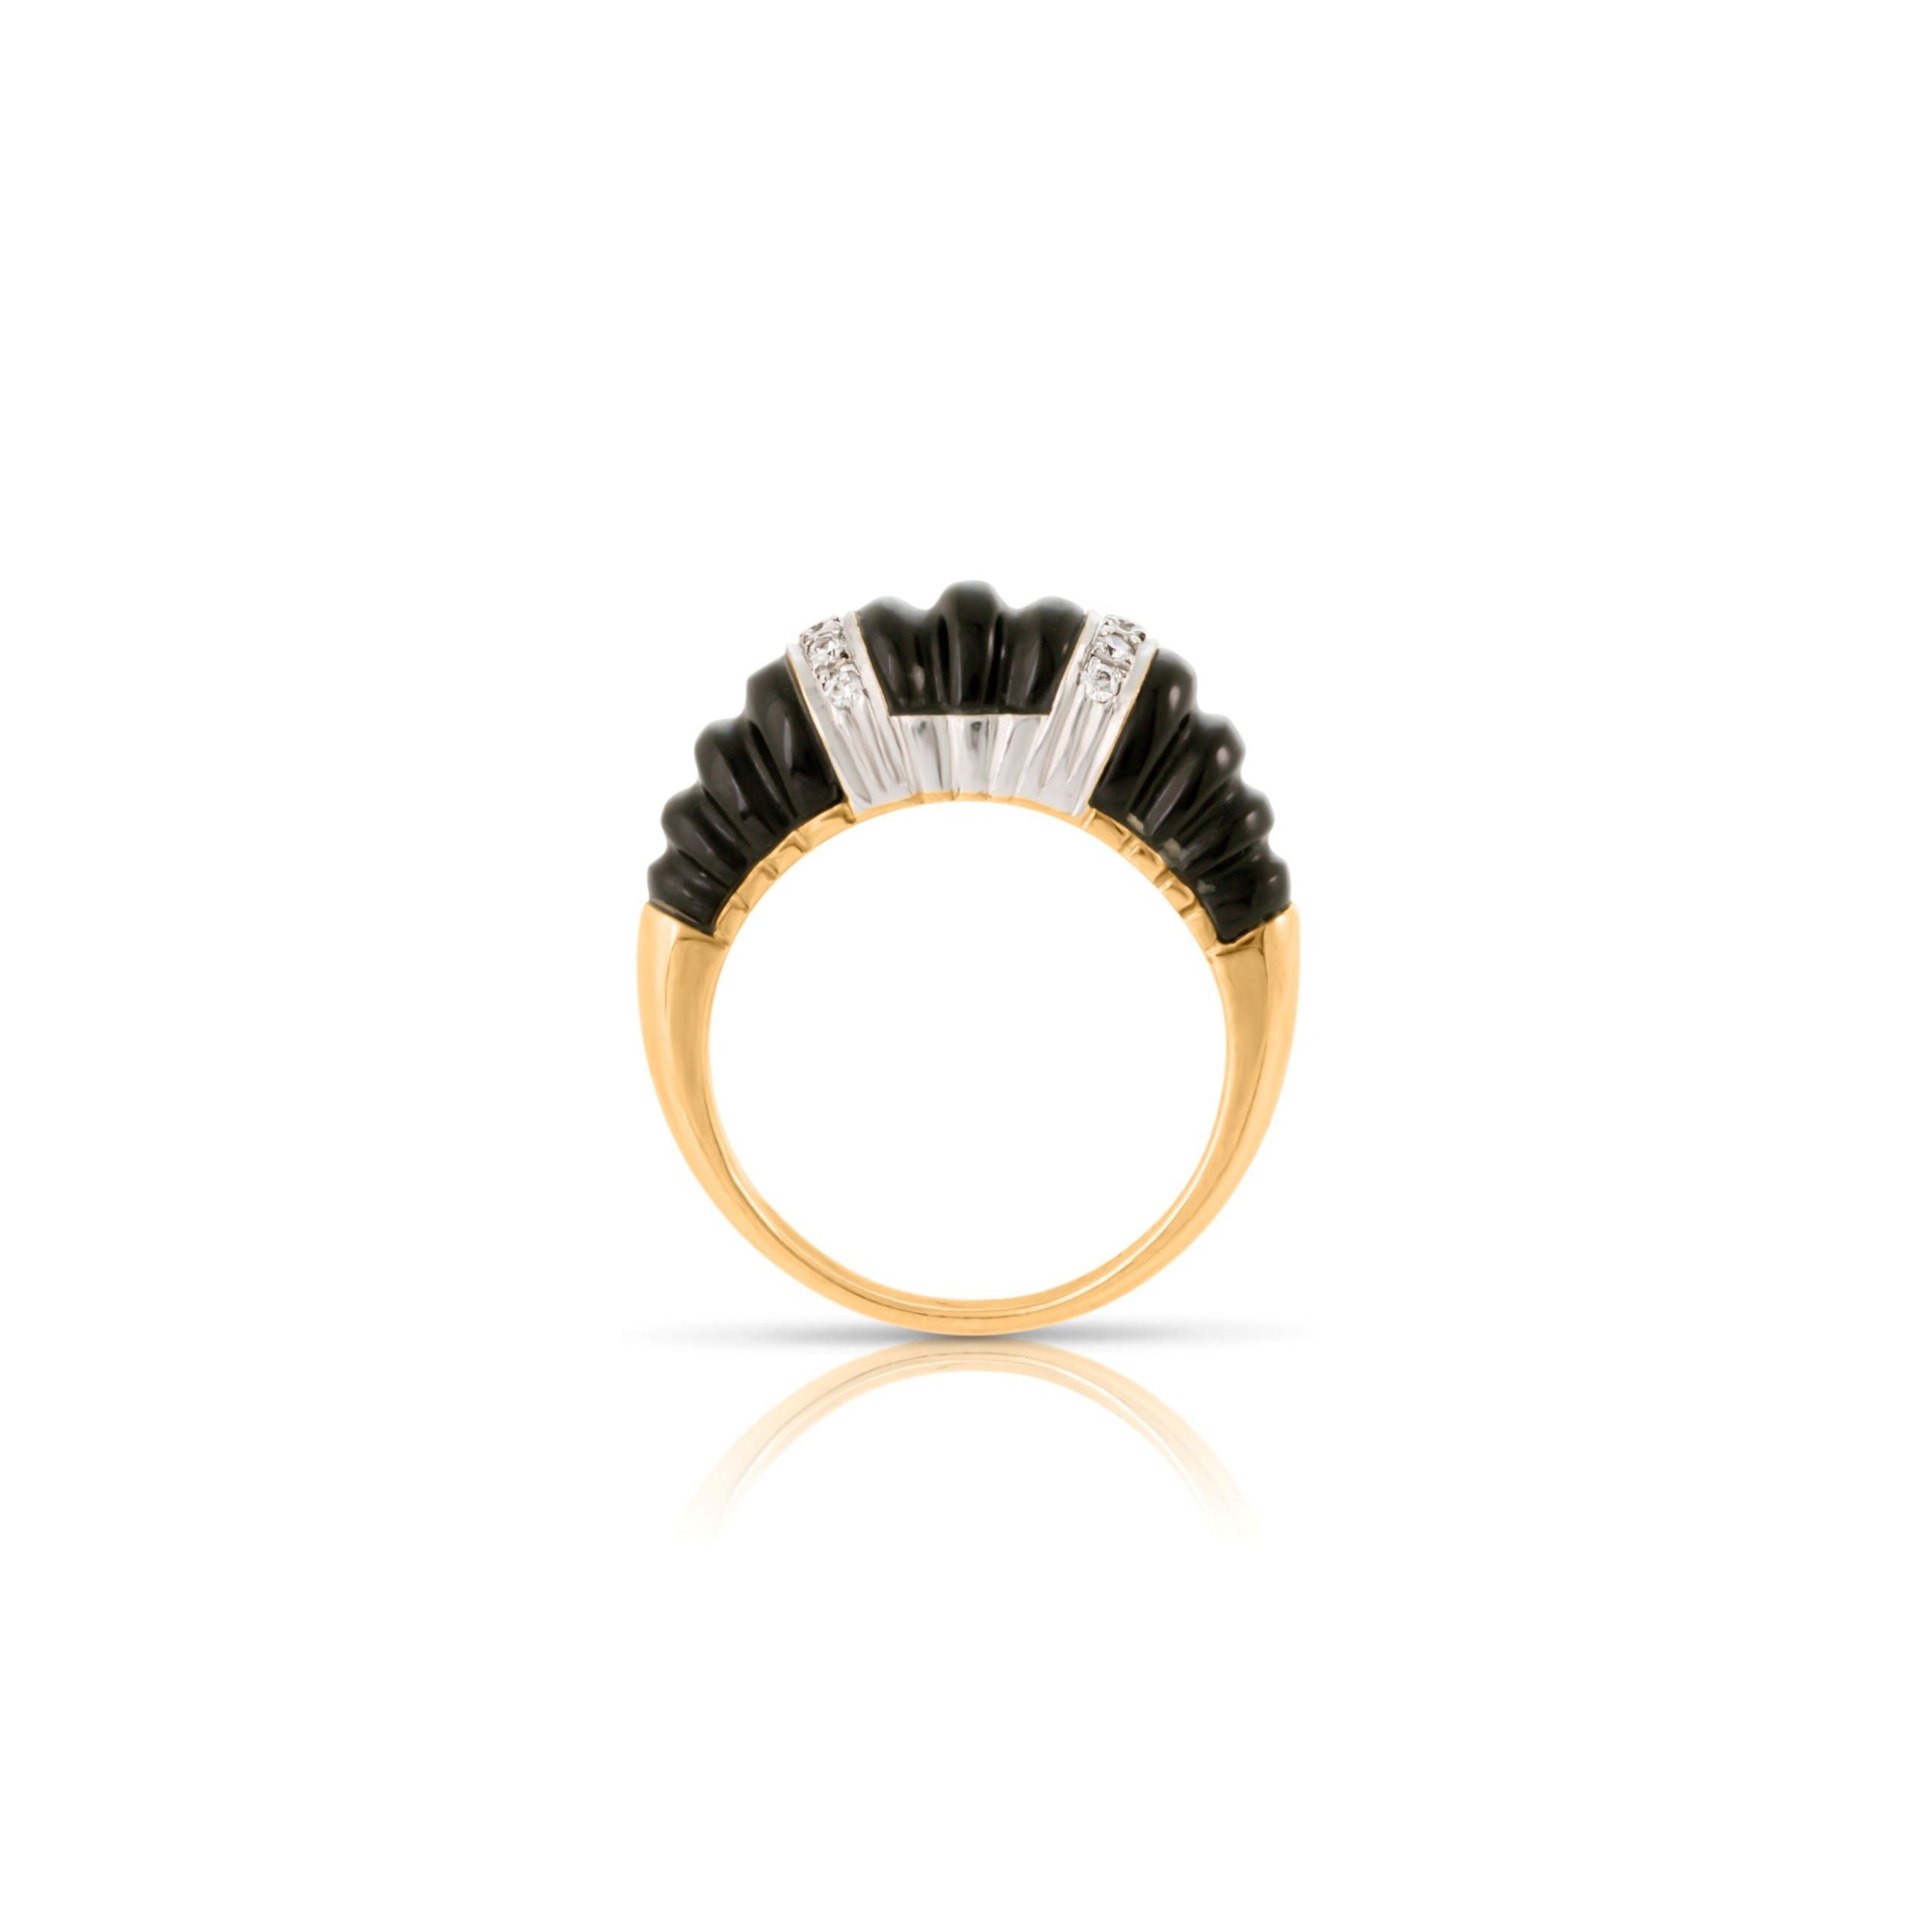 1980s-1990s gold dome ring with carved black onyx gallery and diamond accents.